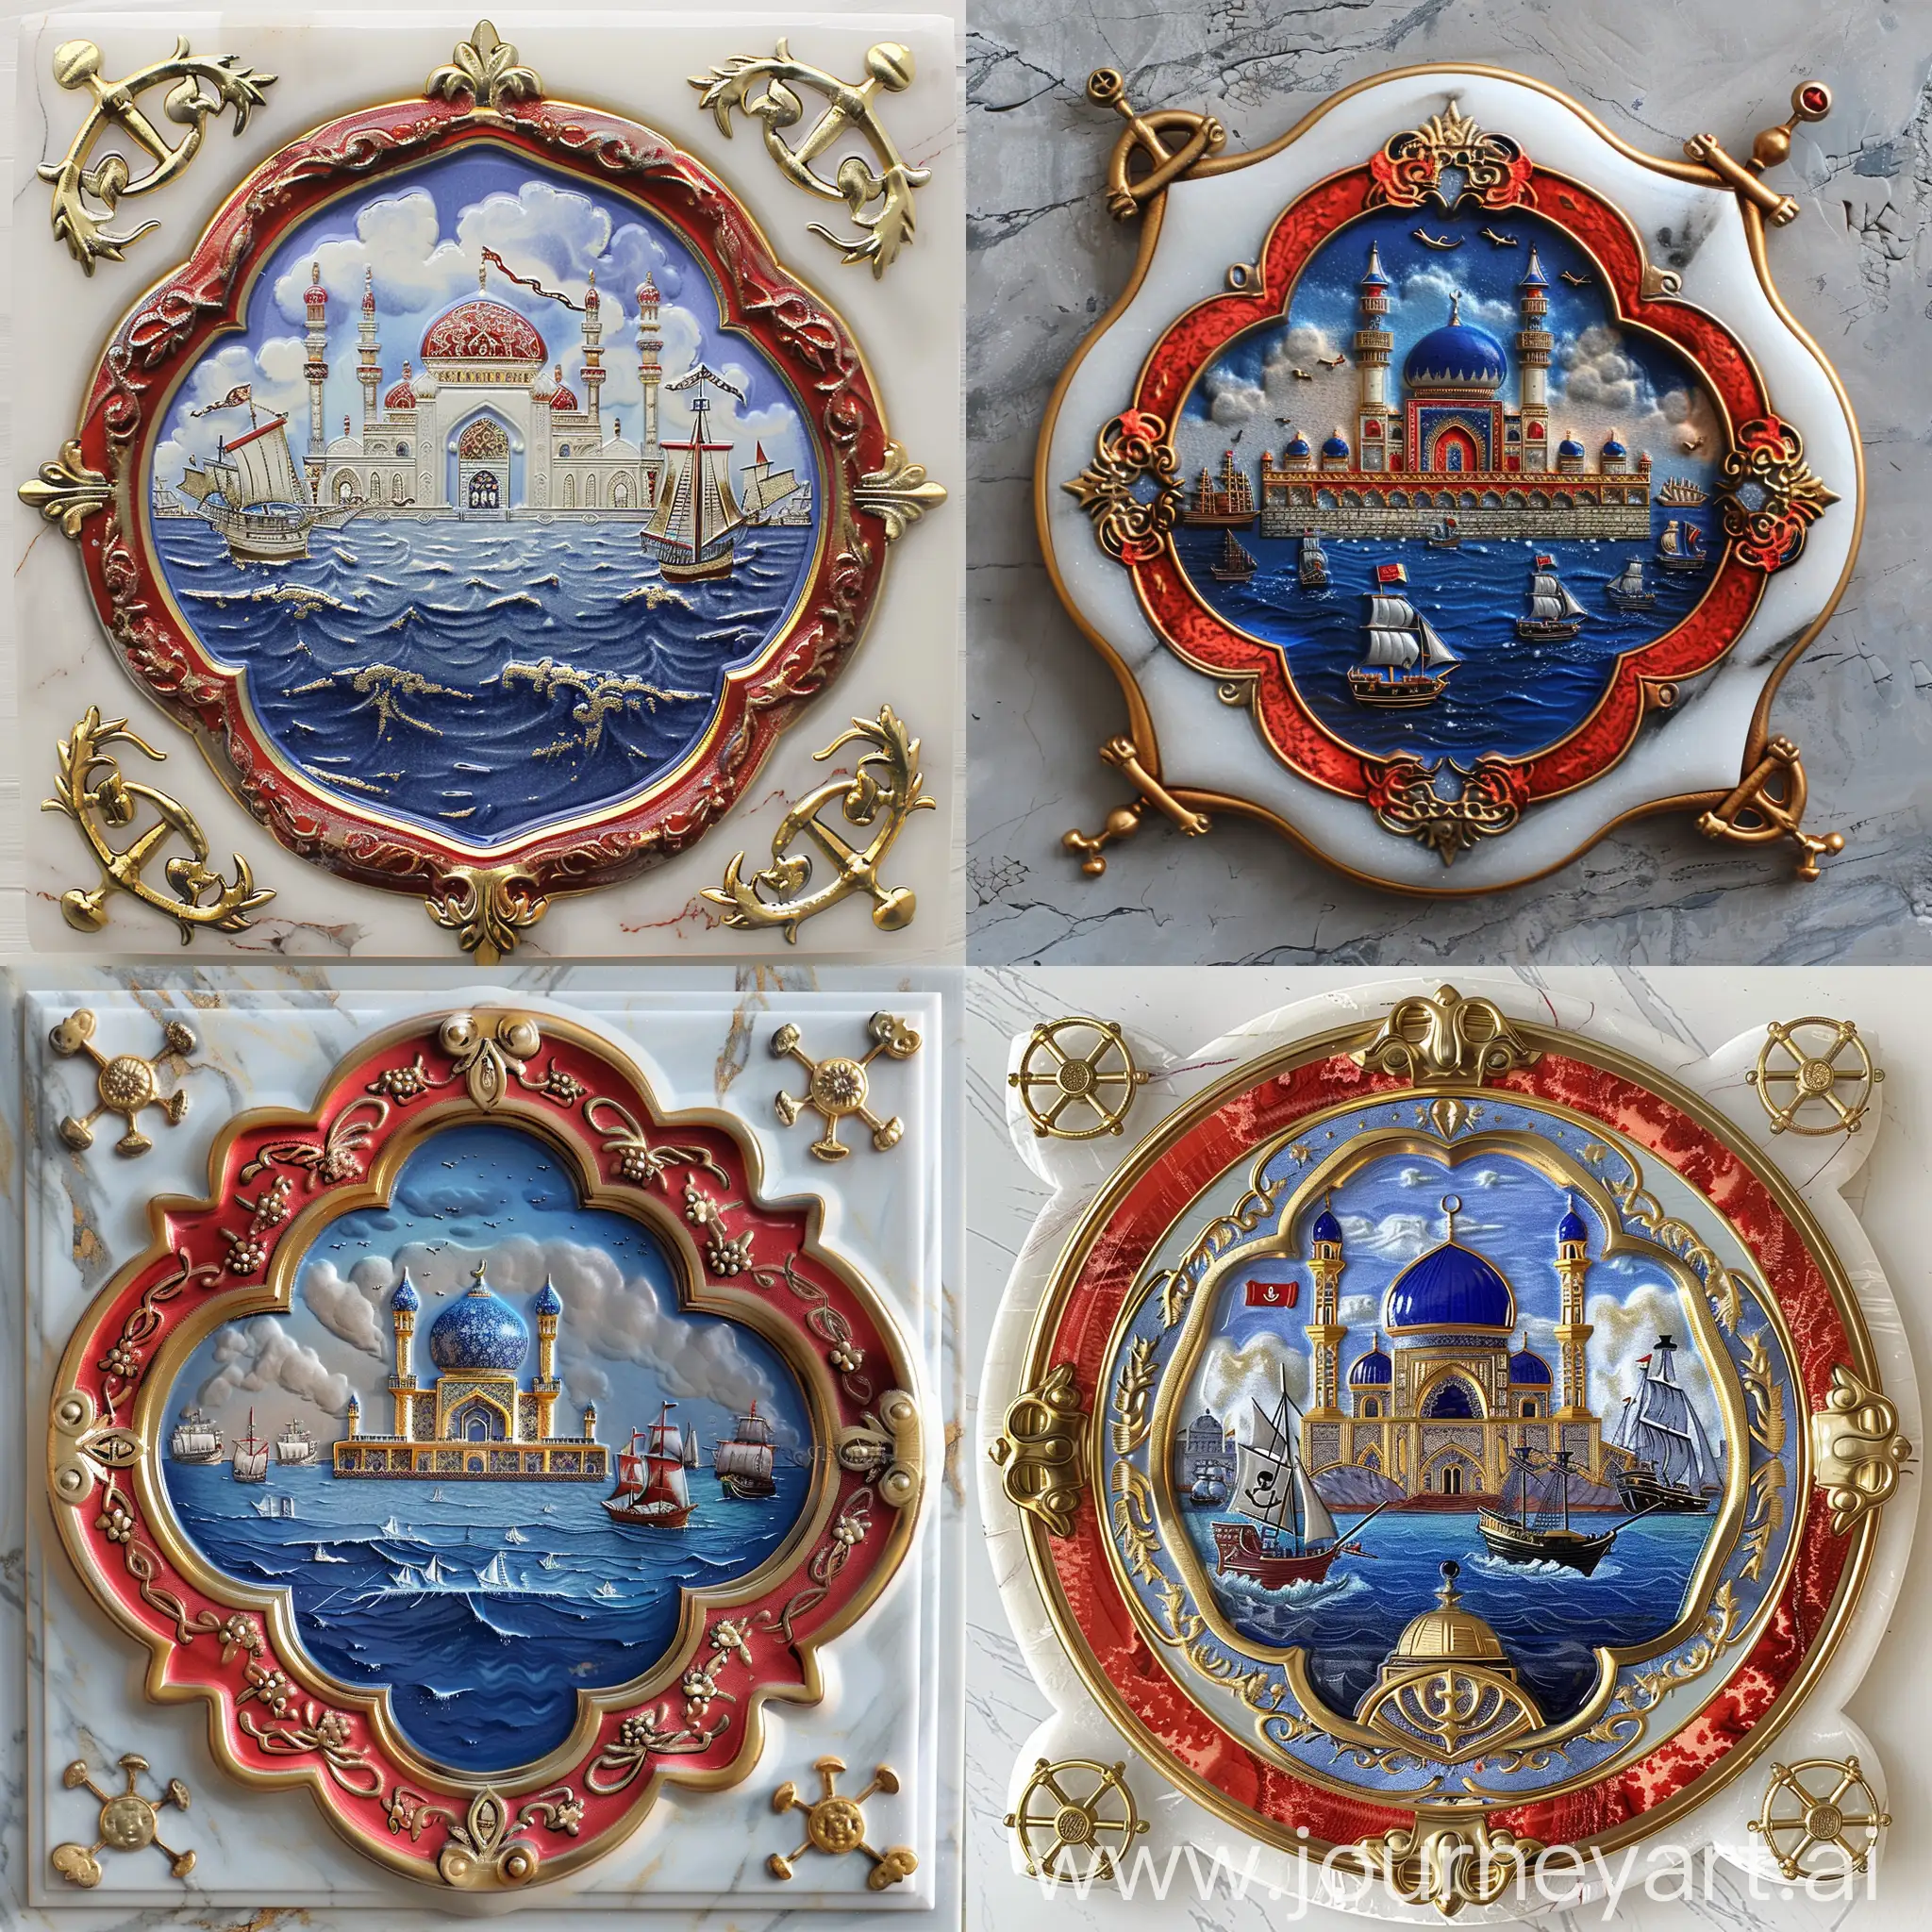 Pirates-Style-Medal-with-Persian-Mosque-Painting-Overlooking-the-Sea